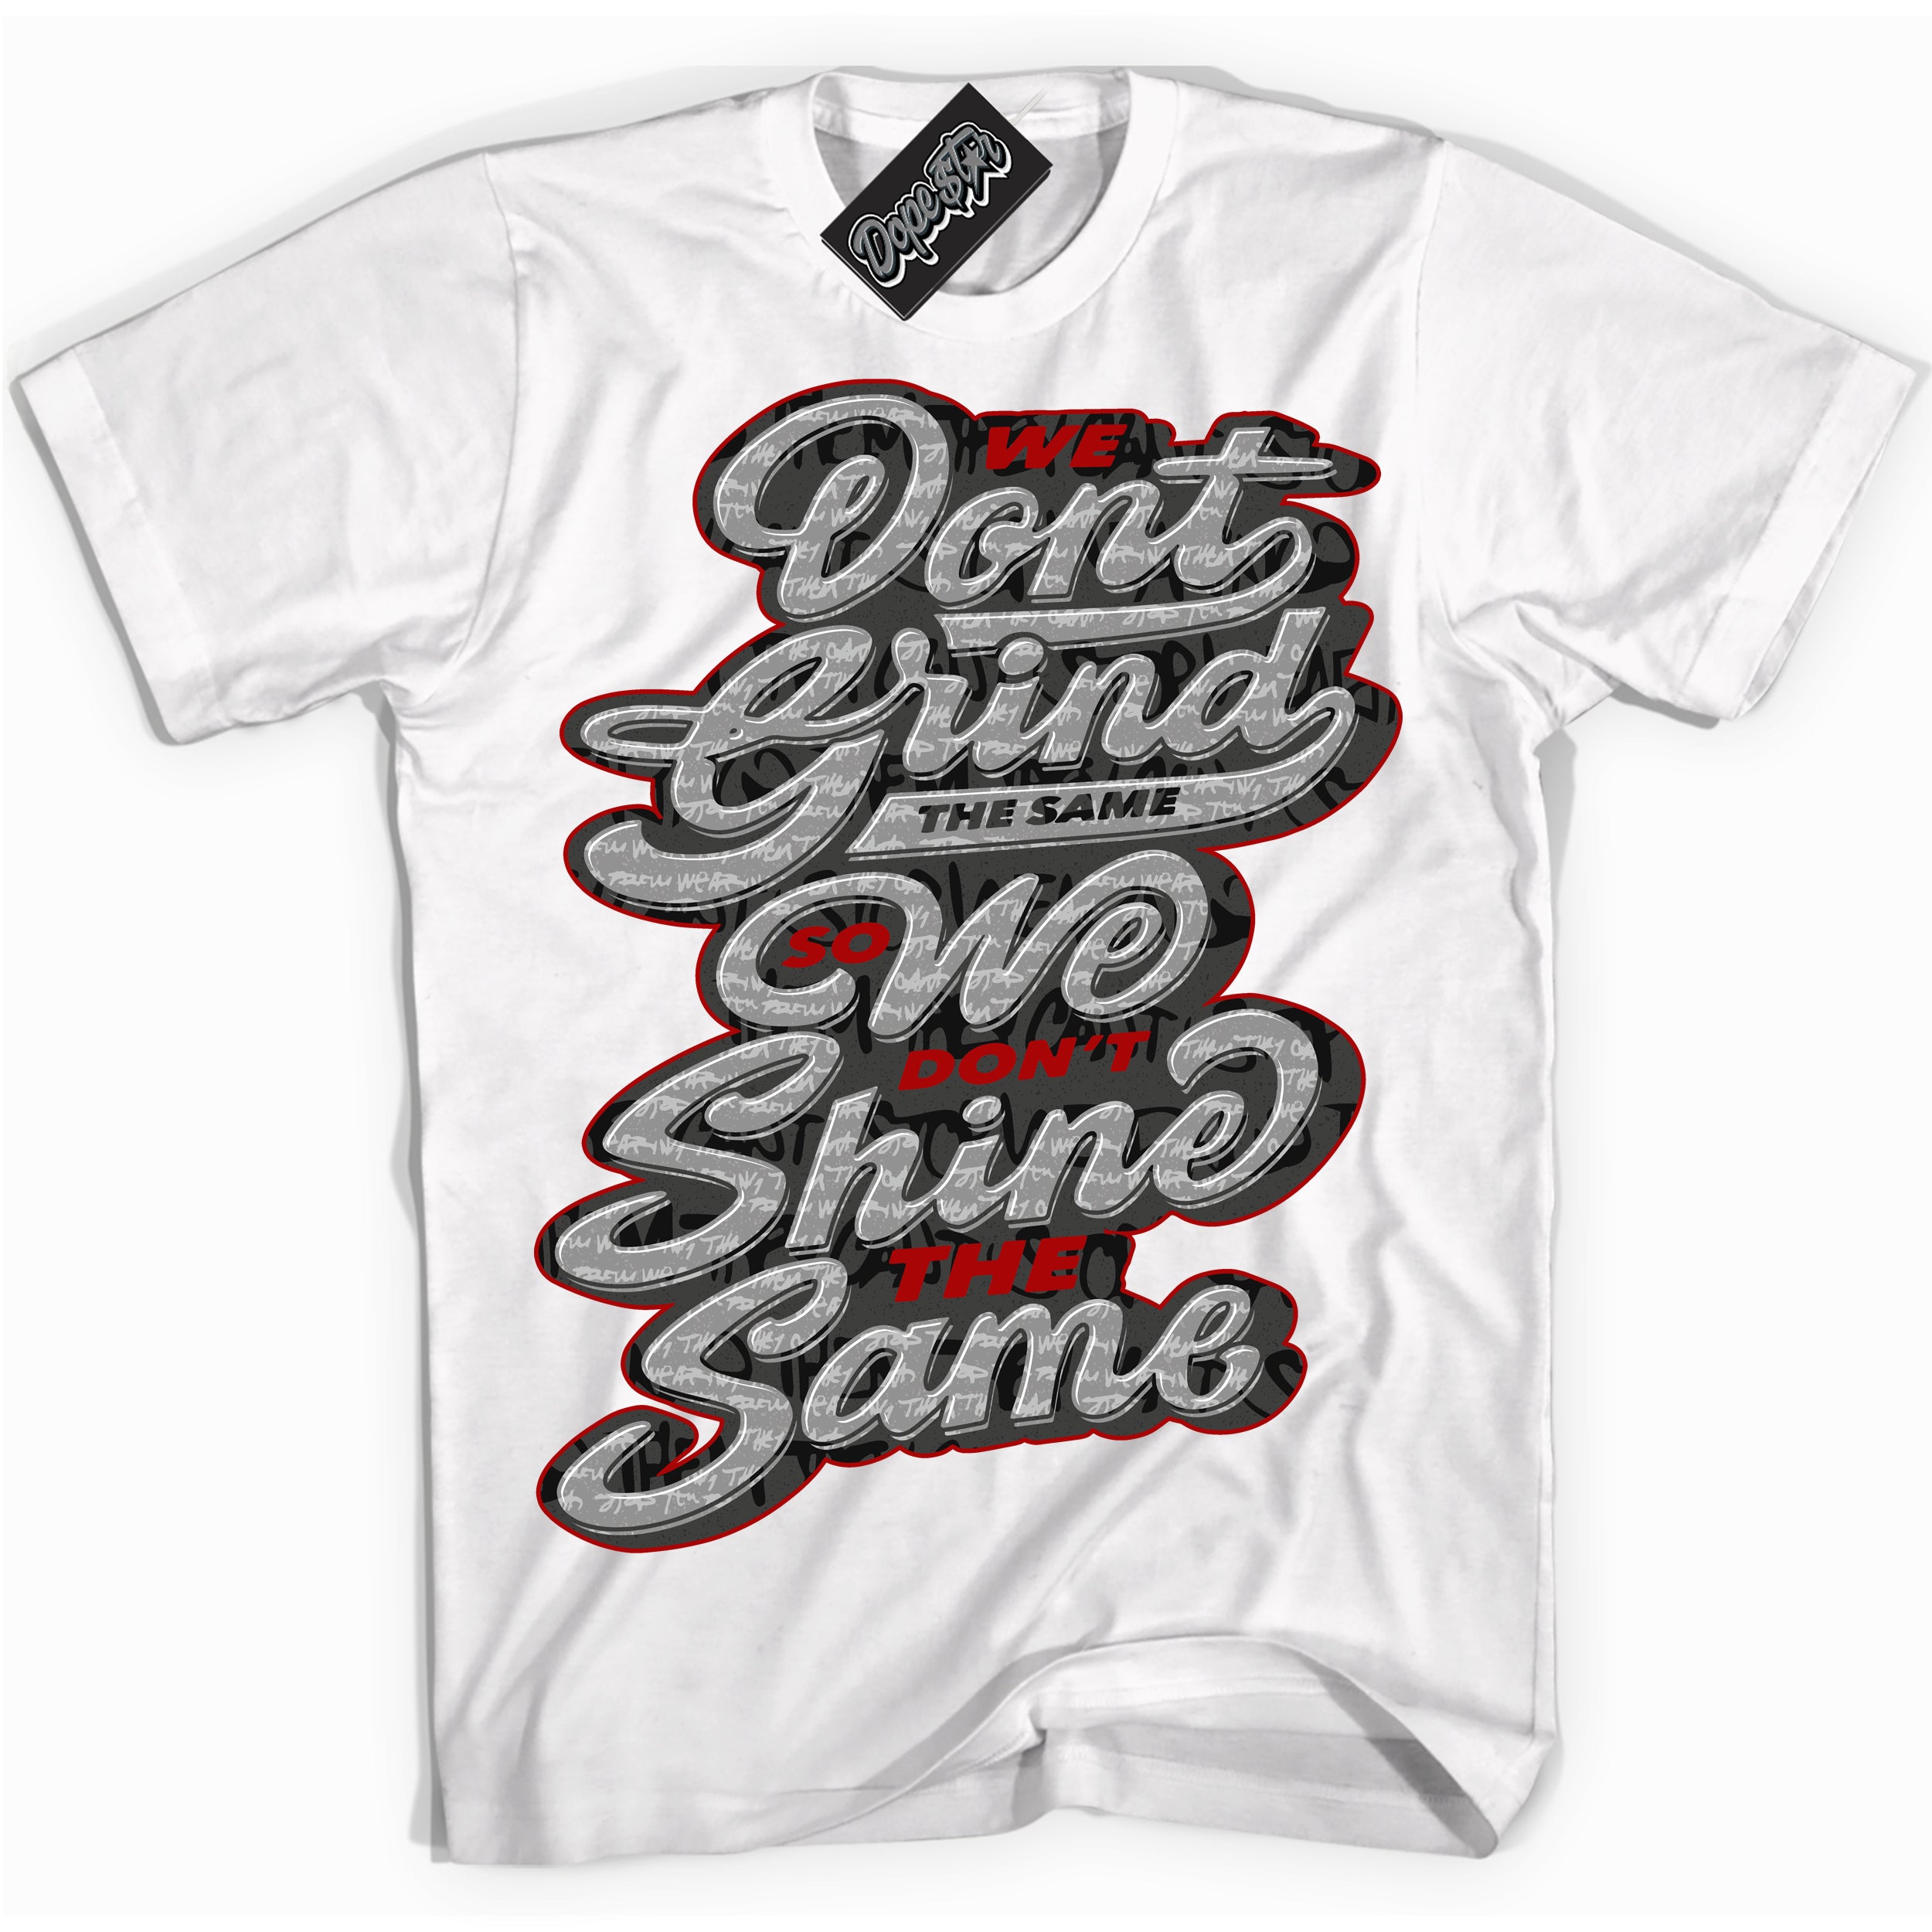 Cool White Shirt with “ Grind Shine ” design that perfectly matches Rebellionaire 1s Sneakers.